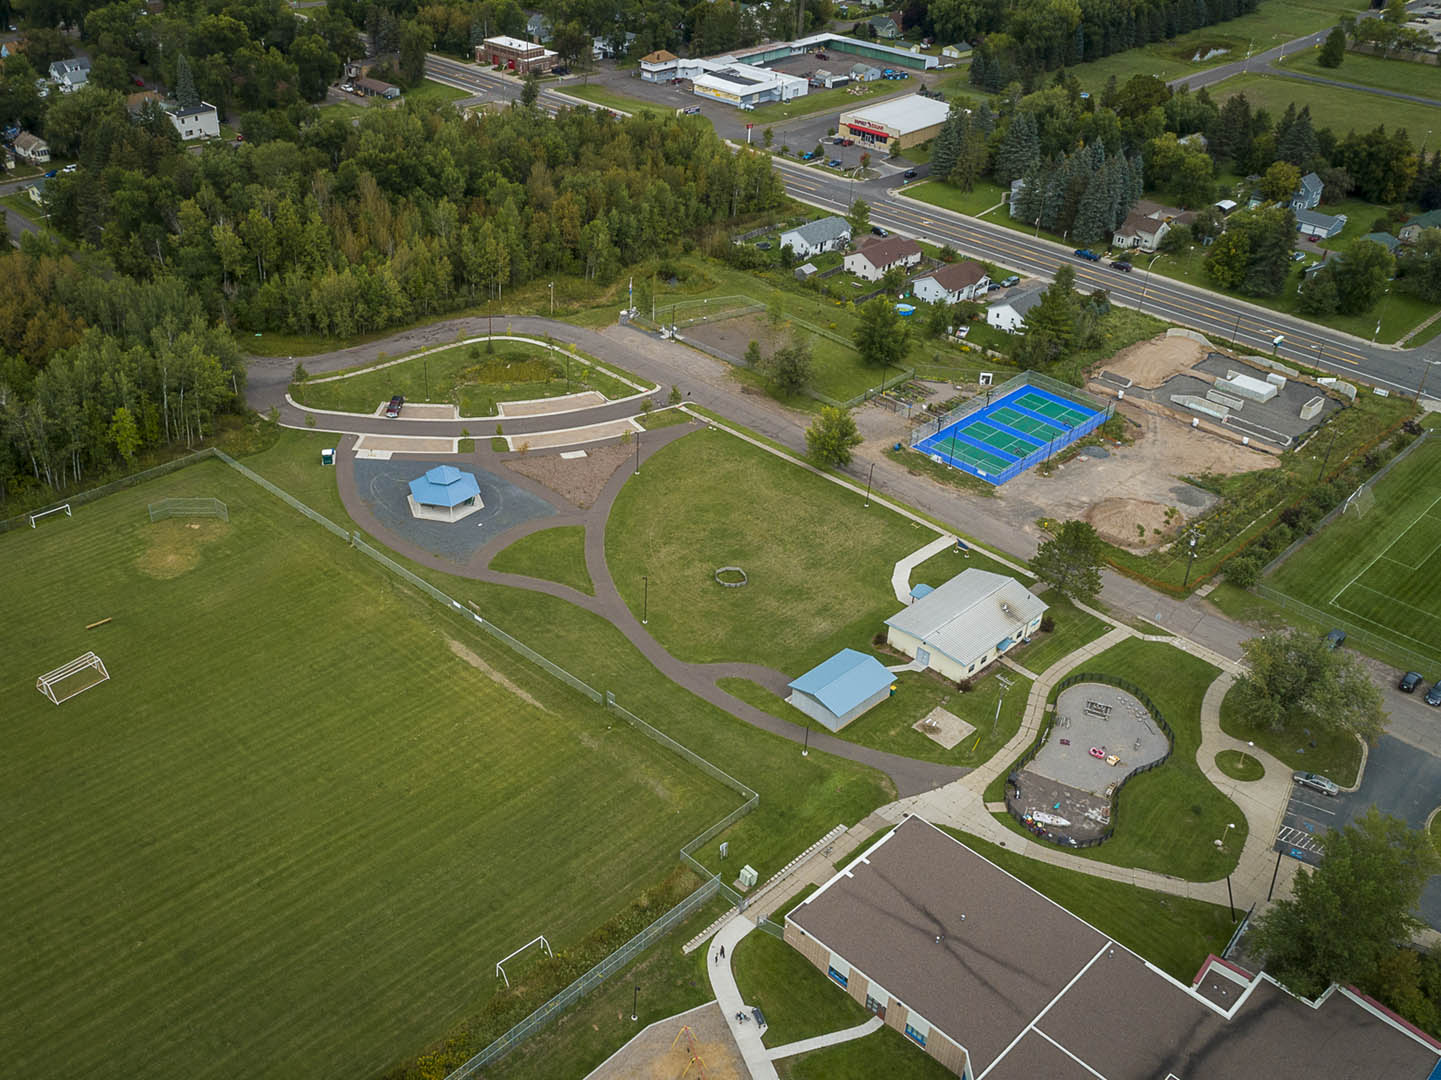 An aerial view of the GND REC showing the soccer fields, the Pavilion, the Sport Court, and the Community Building